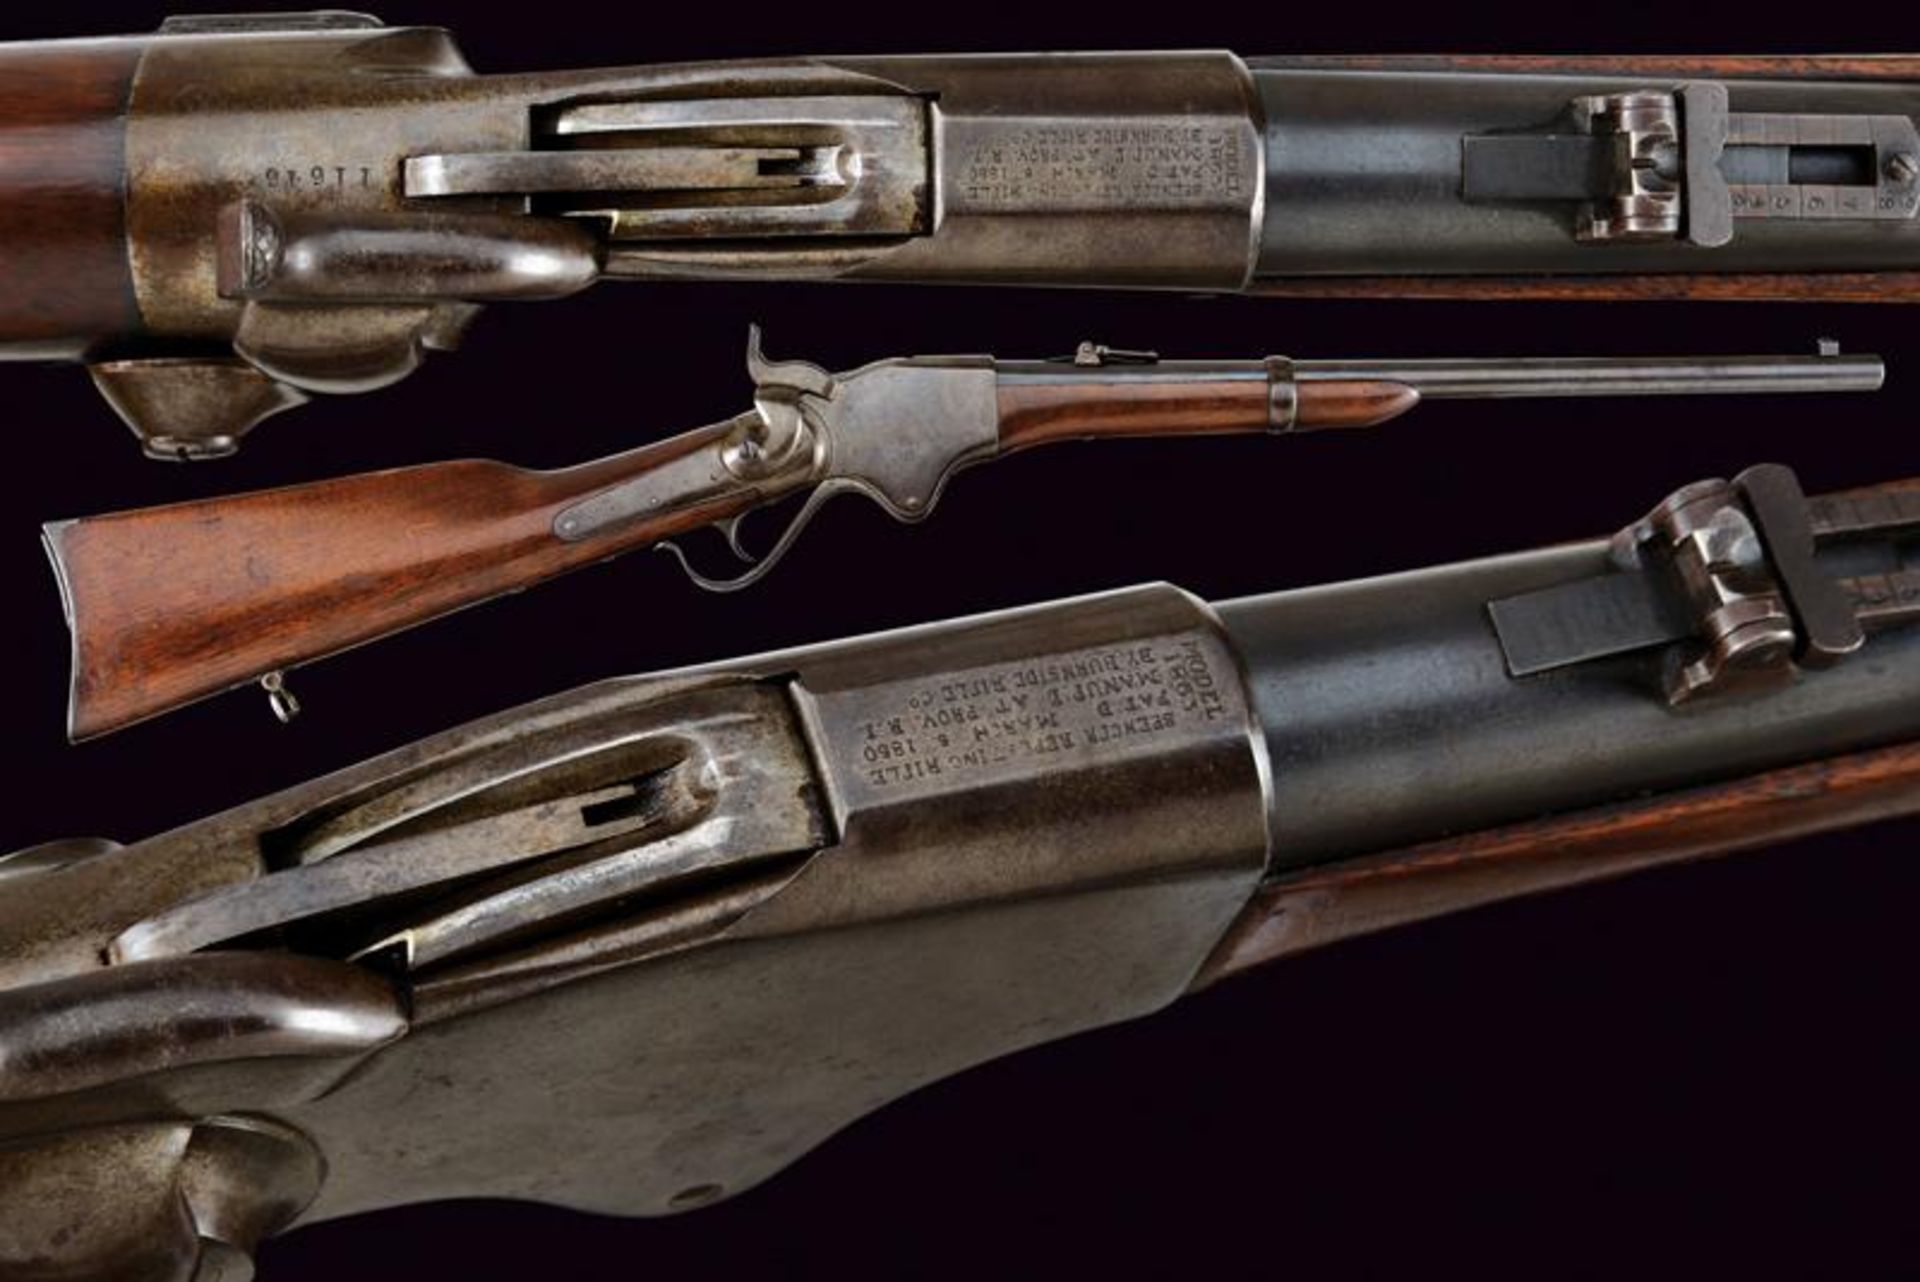 A 1865 model Spencer Repeating Carbine